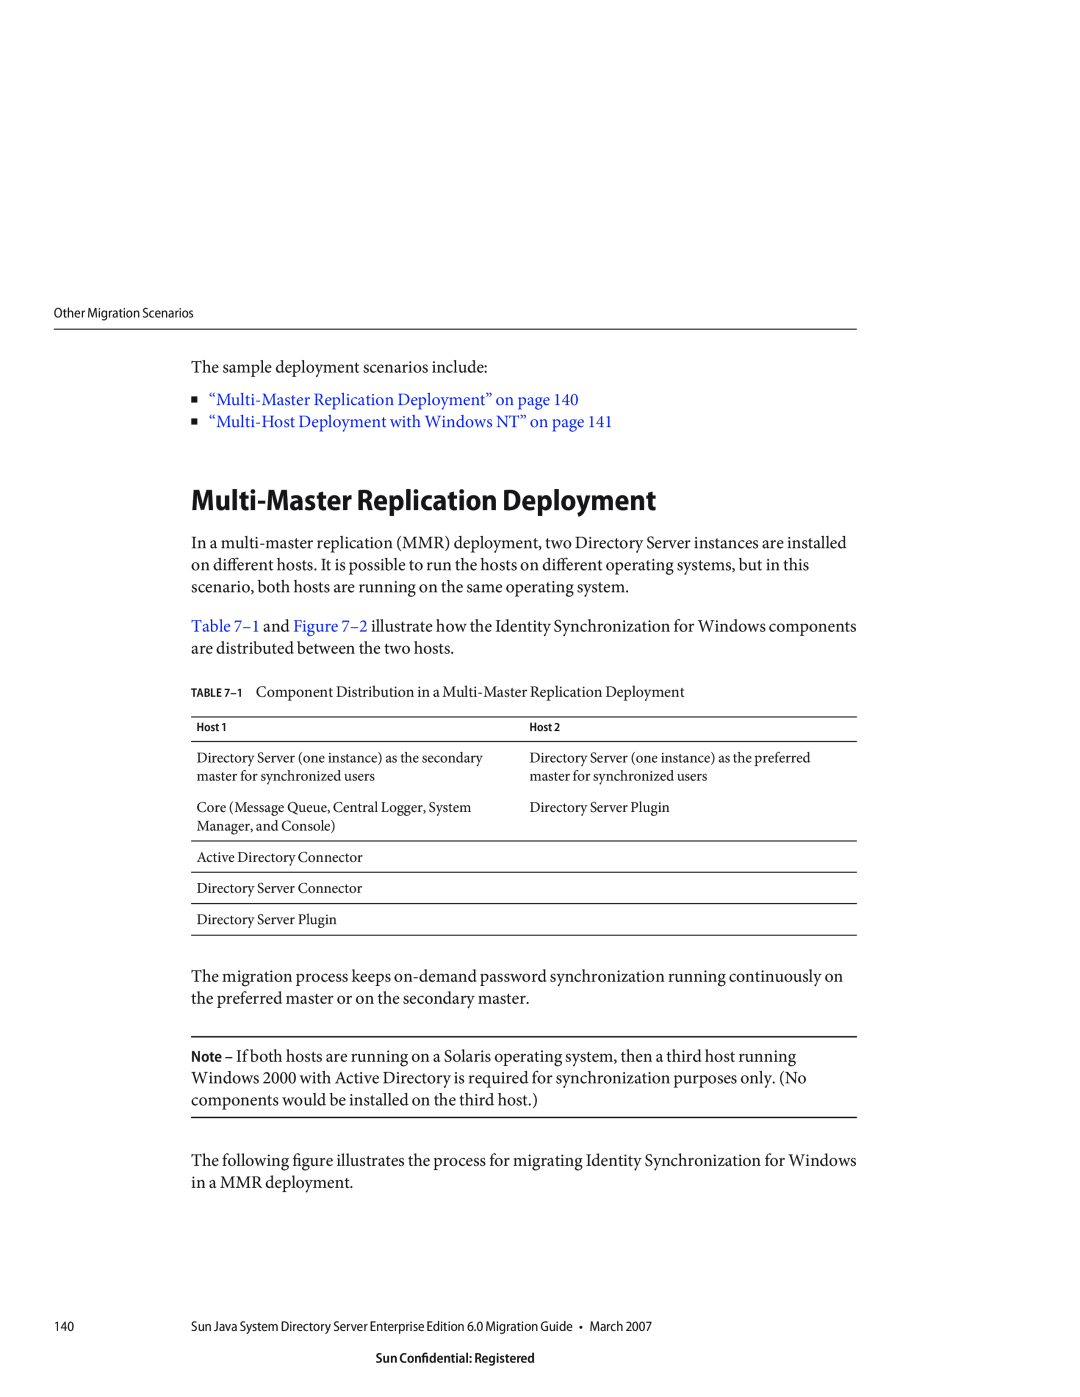 Sun Microsystems 8190994 manual “Multi-Master Replication Deployment” on page 